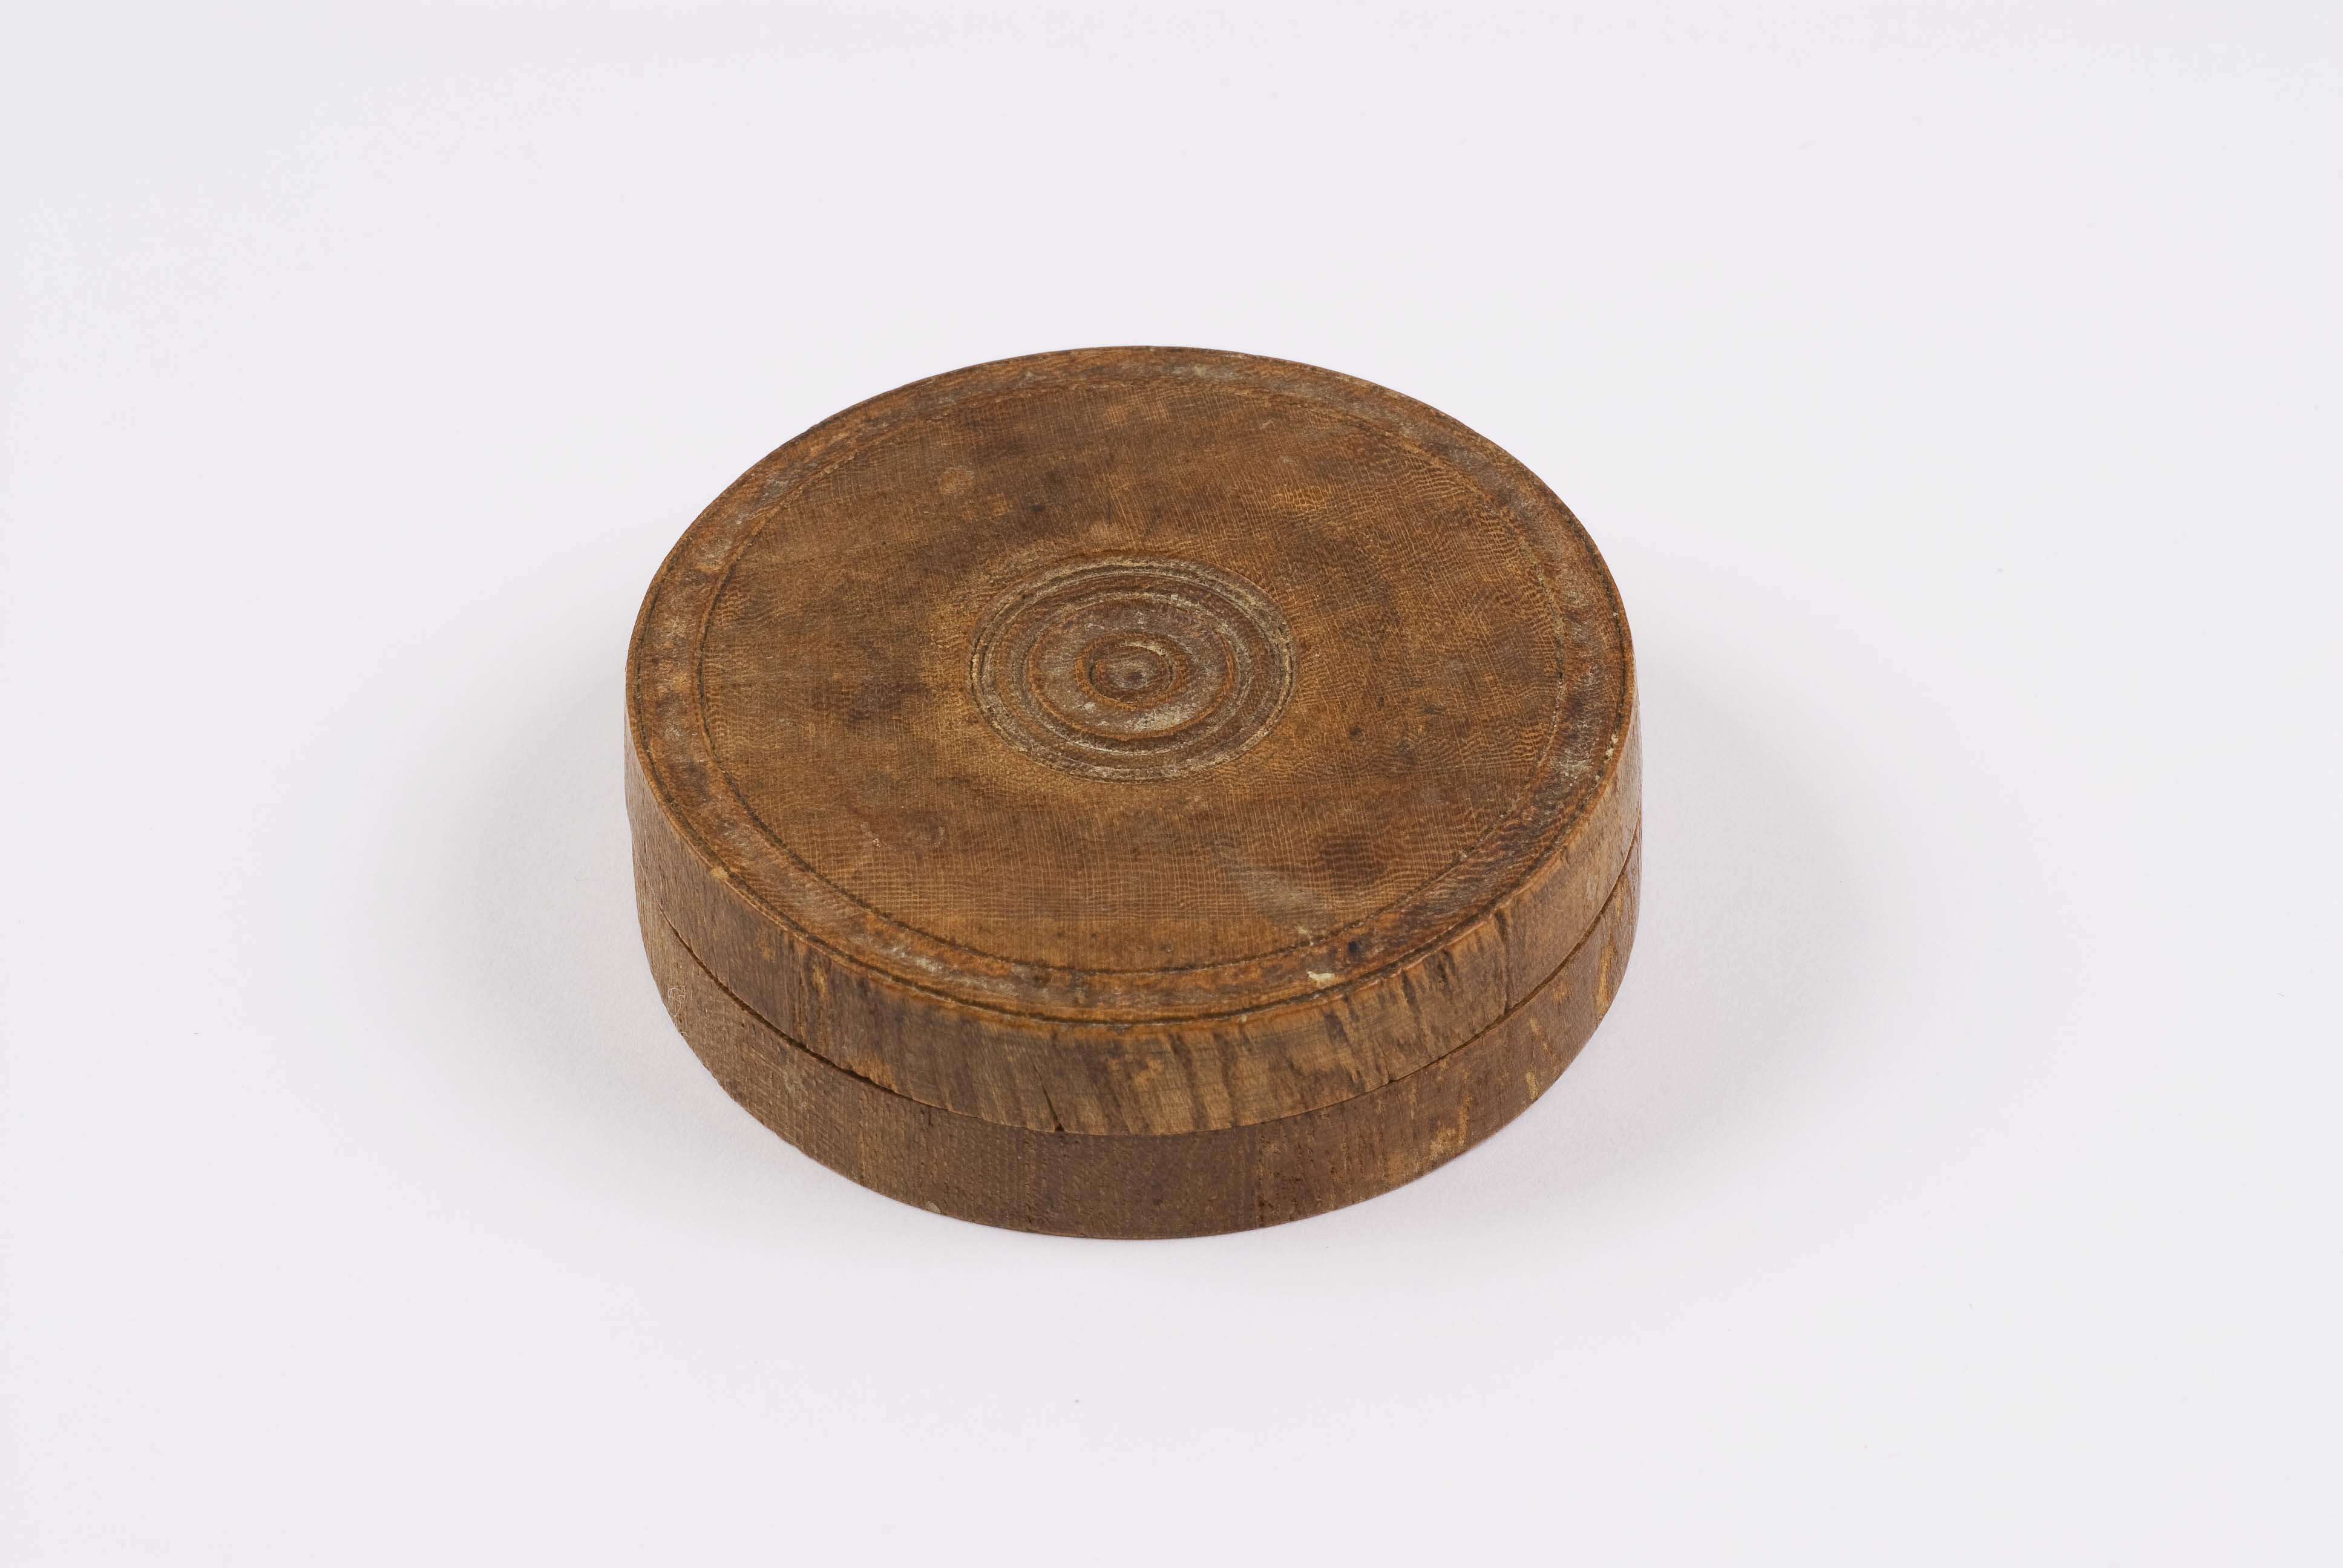 Box made from the wood of the Great Elm, witness to the Treaty of Friendship between Tamenend and Penn